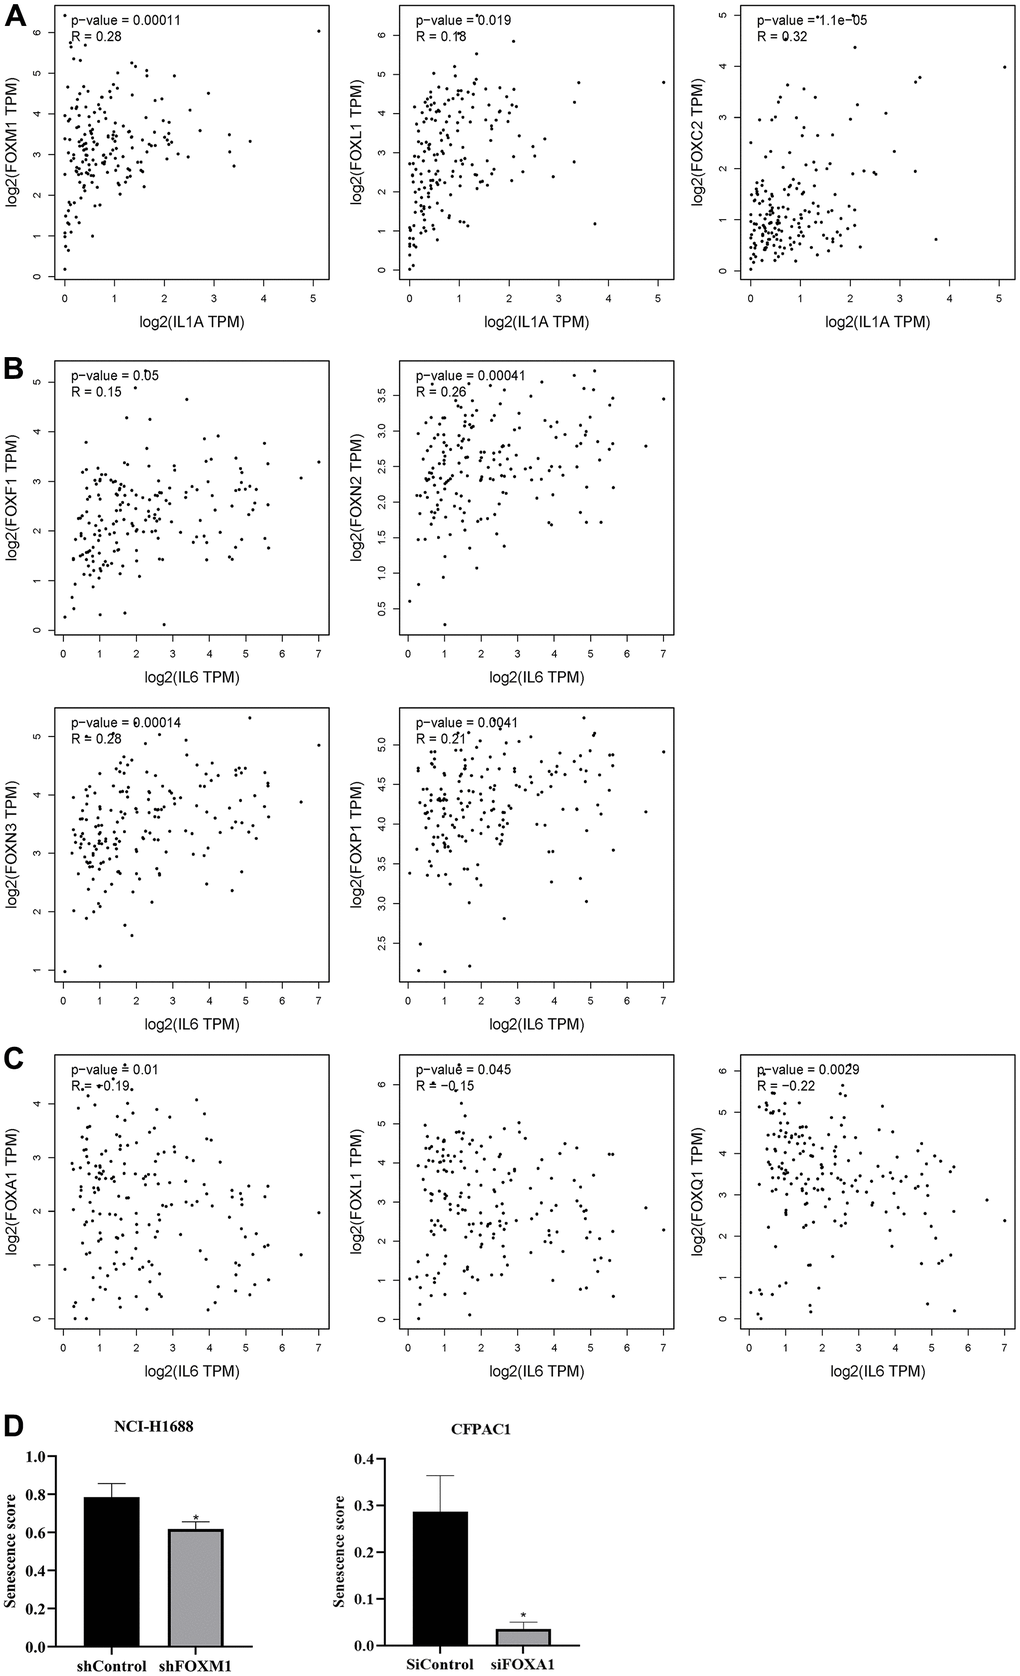 Correlation between differentially expressed FOXs and tumor senescence. (A) Positive correlation between FOXs and IL-1α in pancreatic adenocarcinoma (PAAD), n=179. (B) Positive correlation between FOXs and IL-6 in PAAD, n=179. (C) Negative correlation between FOXs and IL-6 in PAAD, n=179. (D) Senescence score of FOXM1 and FOXA1 calculated using SENESCopedia. *, p 